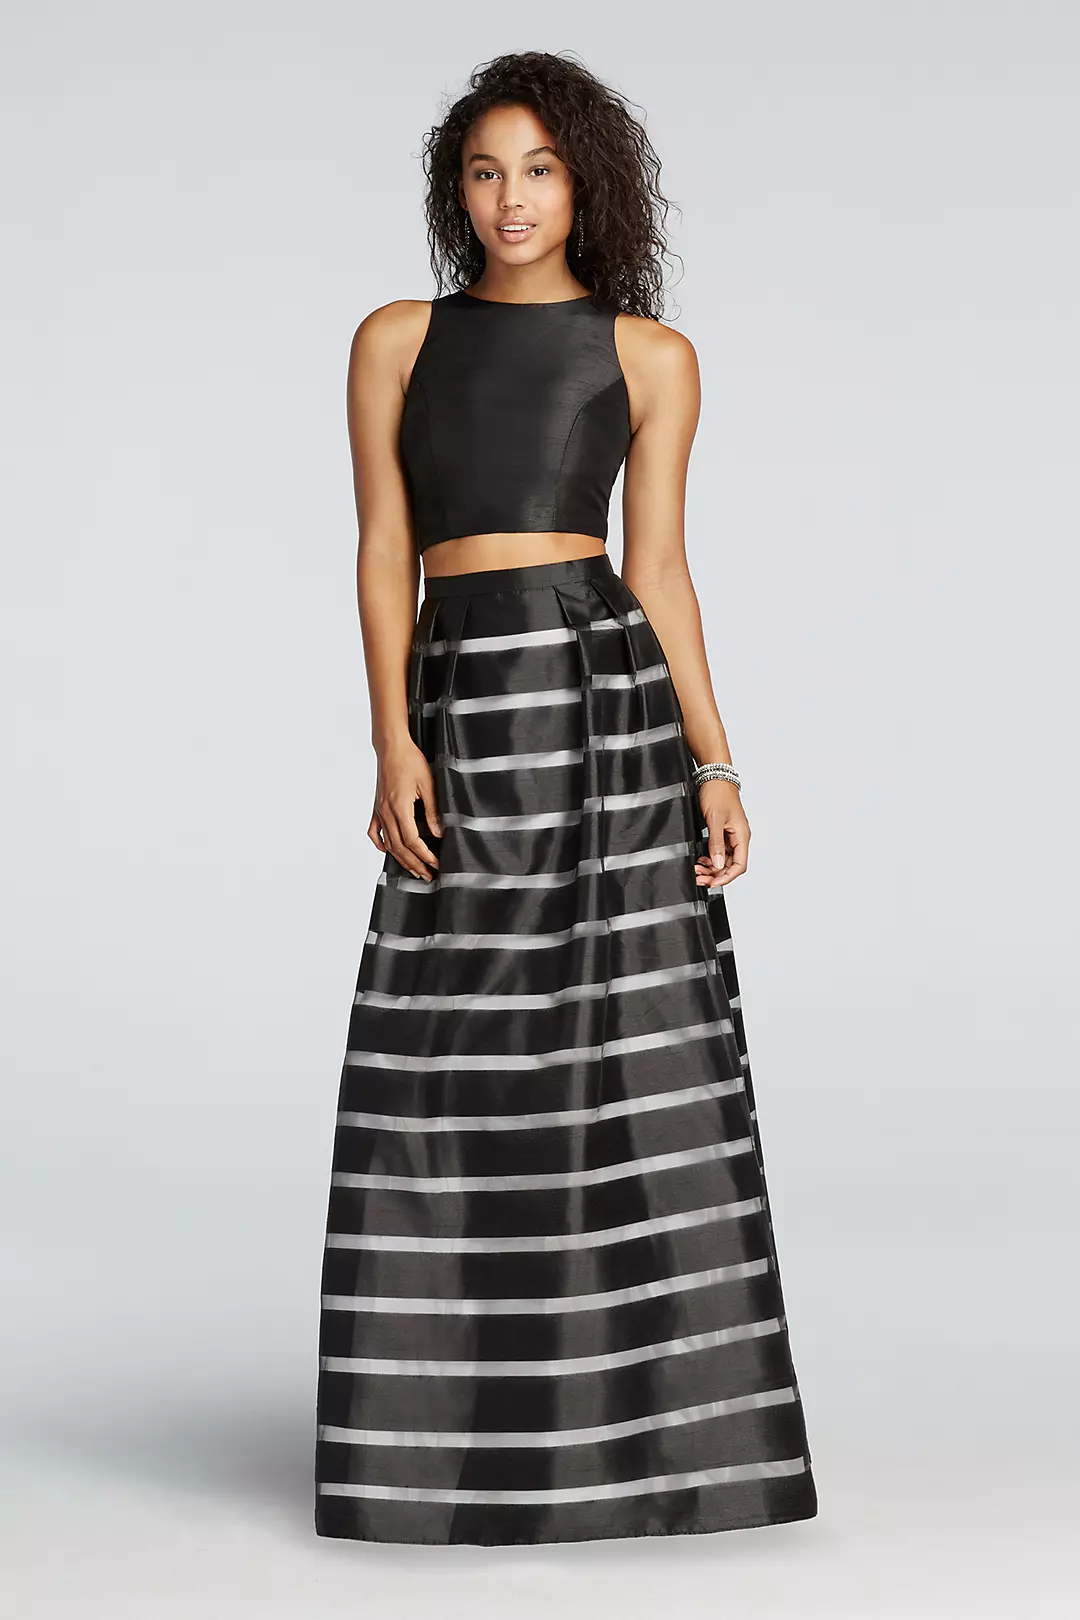 Two Piece Prom Crop Top with Striped Satin Skirt Image